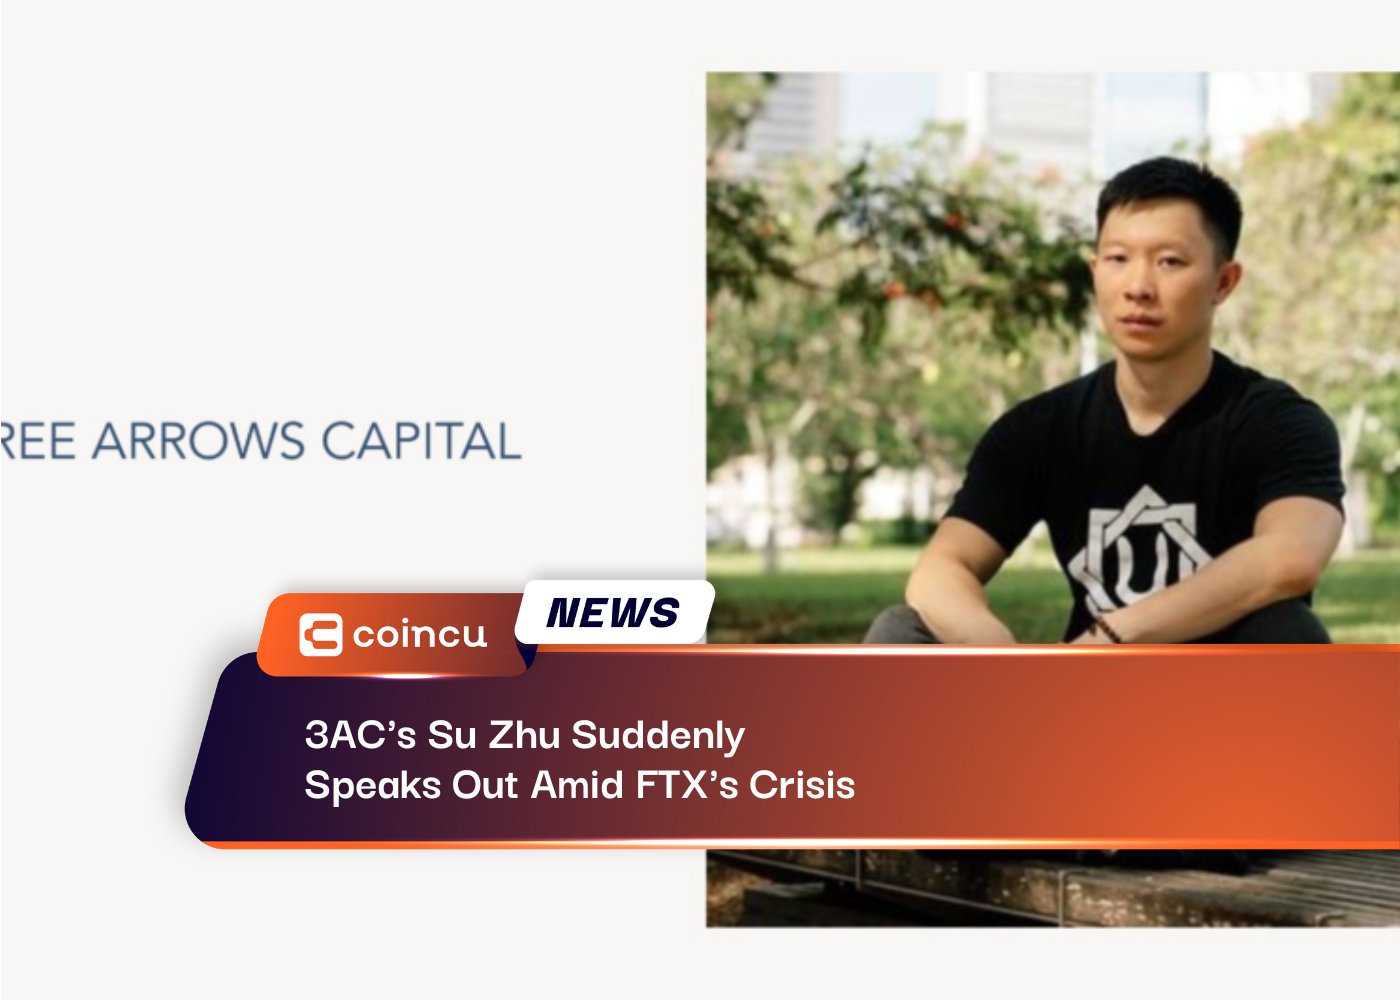 3AC's Su Zhu Suddenly Speaks Out Amid FTX's Crisis